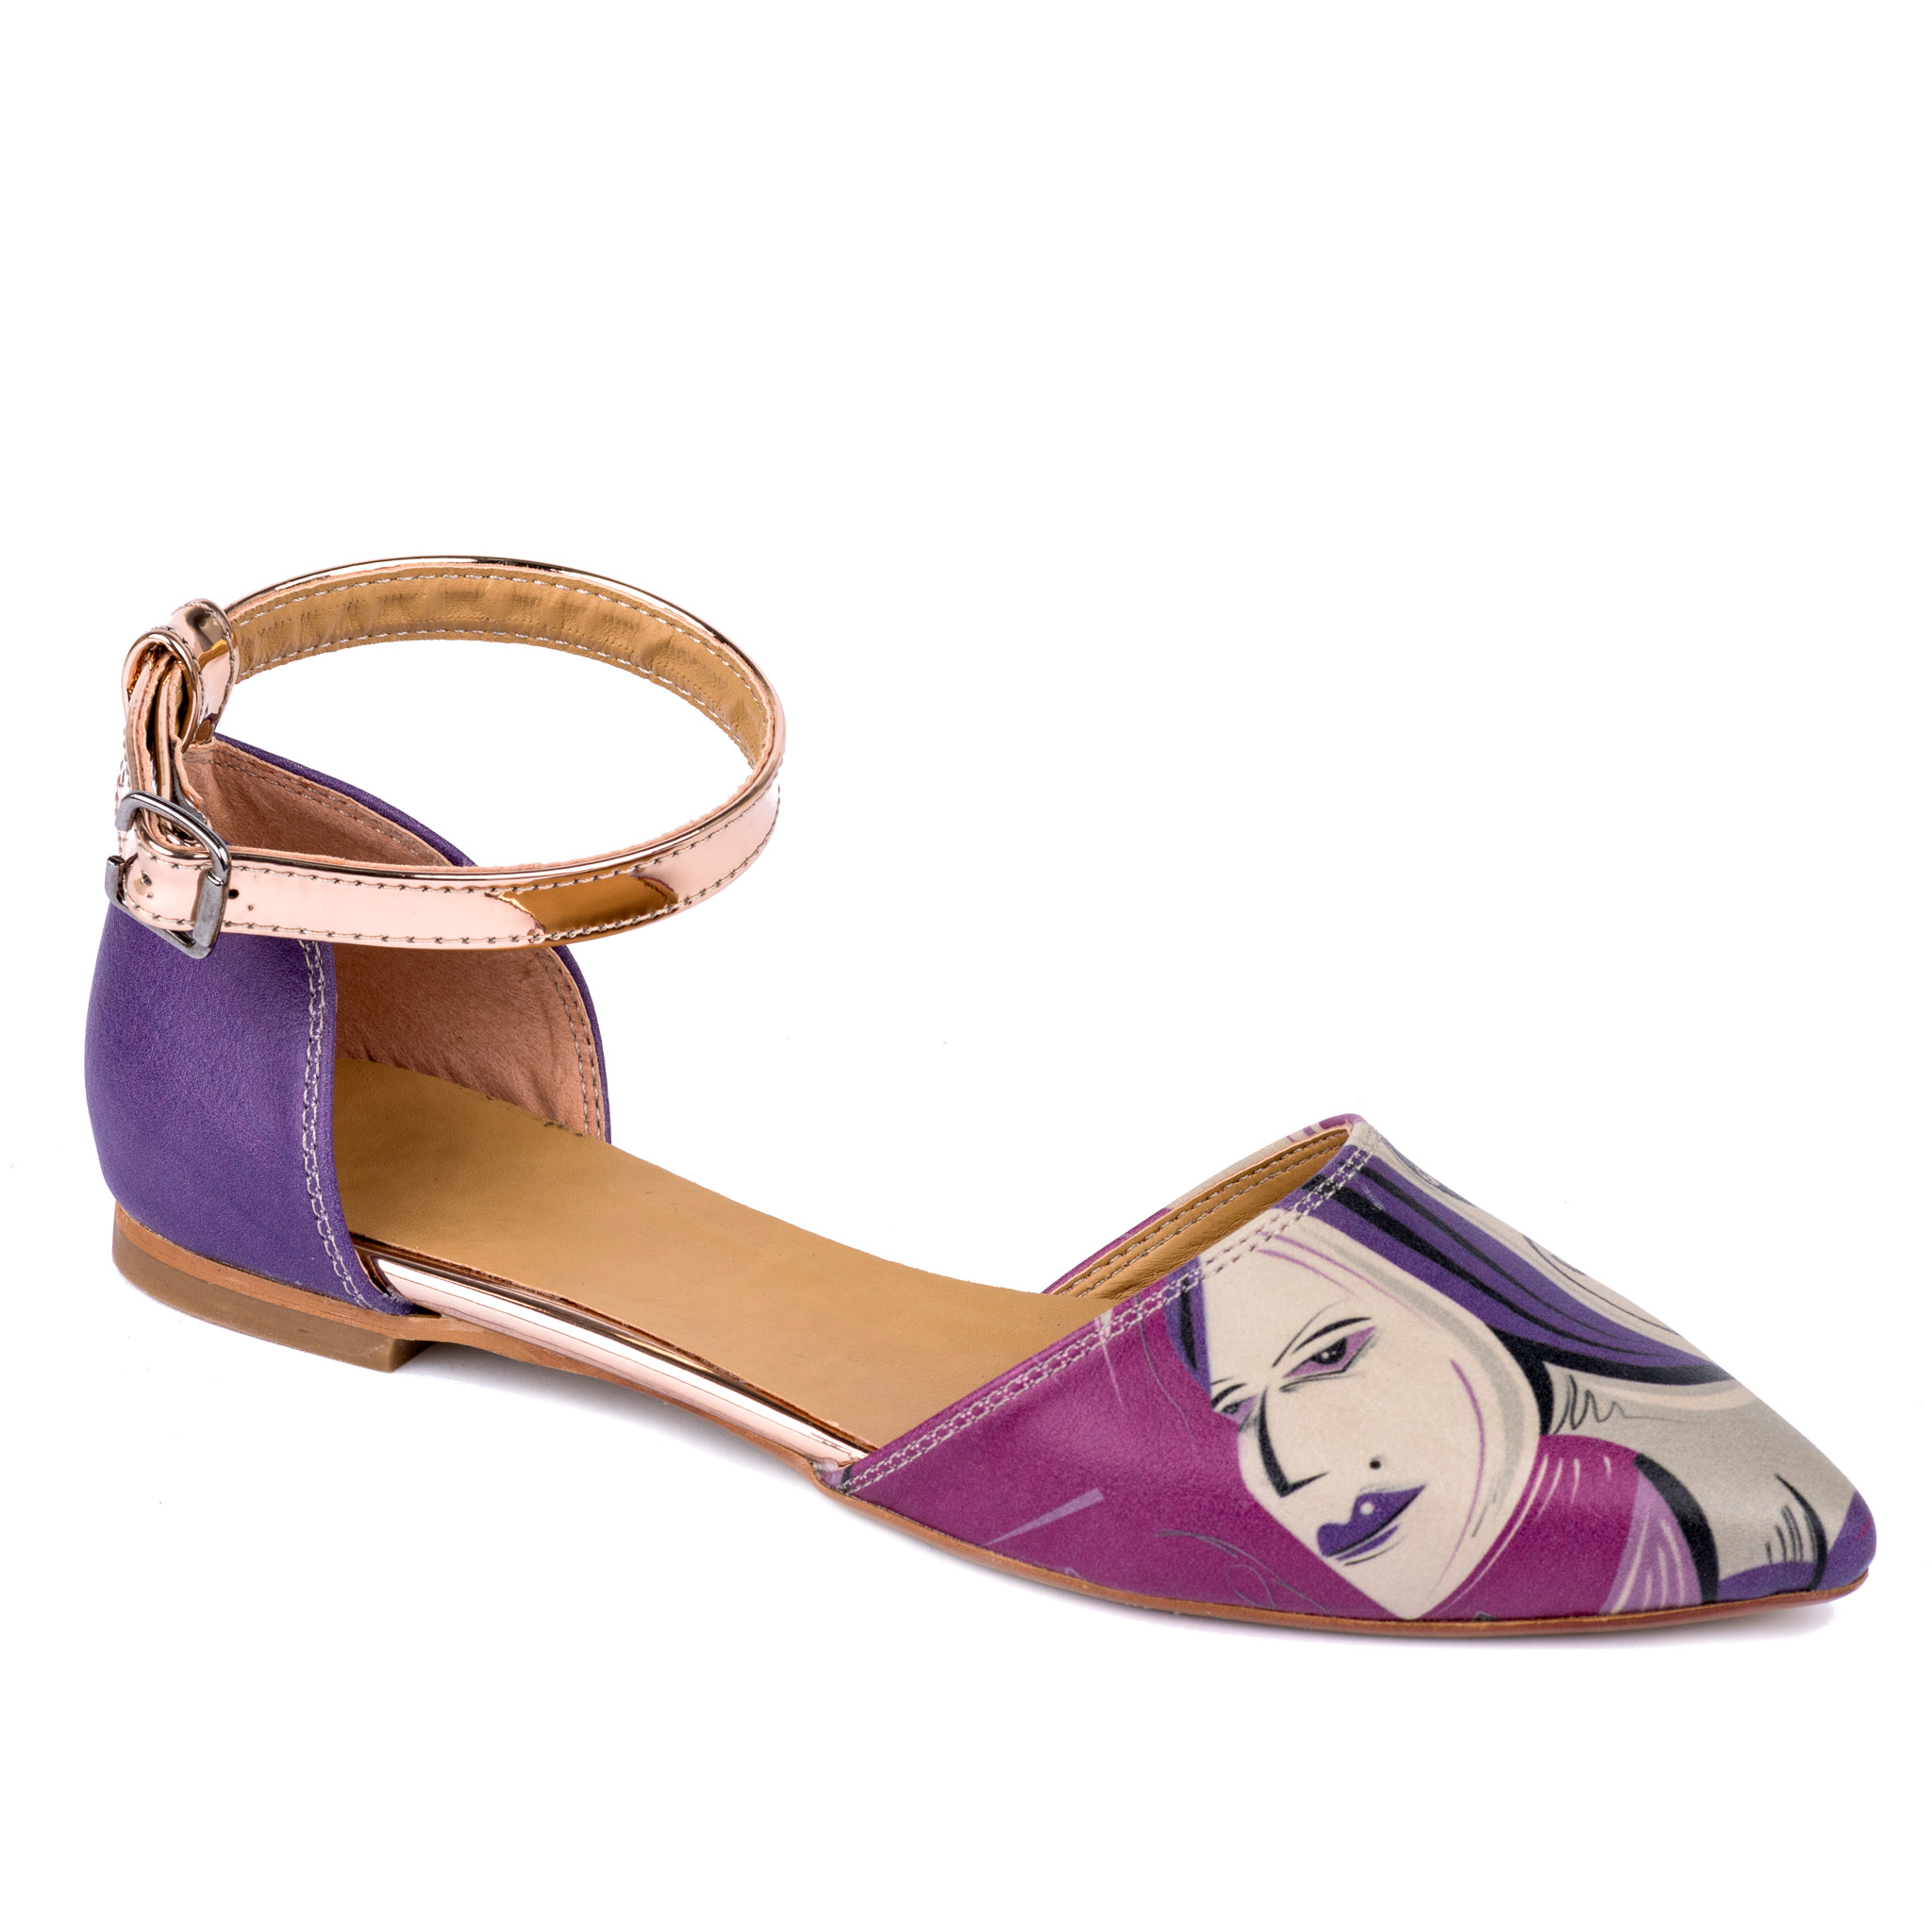 GIRL POINTED FLATS - PURPLE